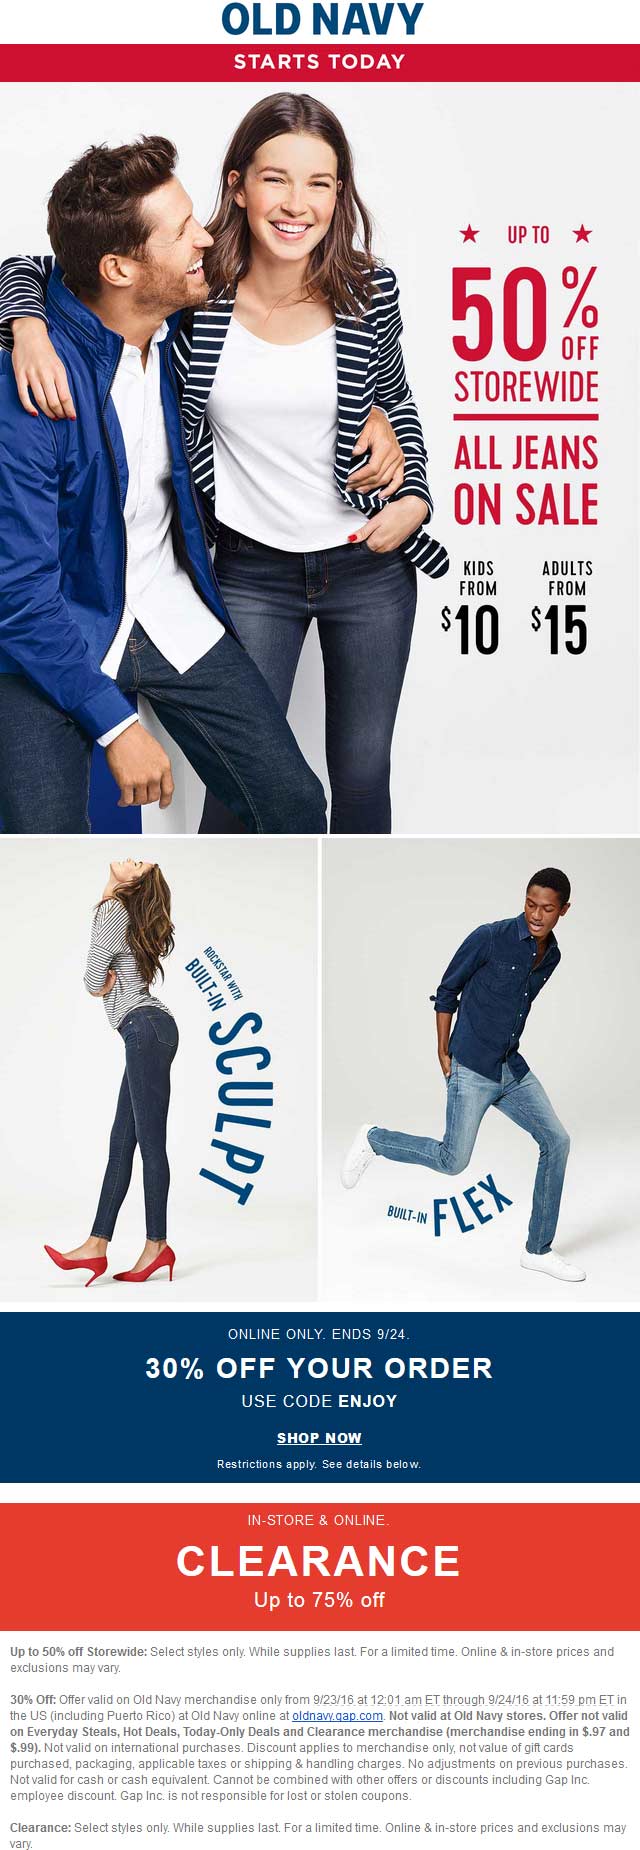 old-navy-march-2021-coupons-and-promo-codes